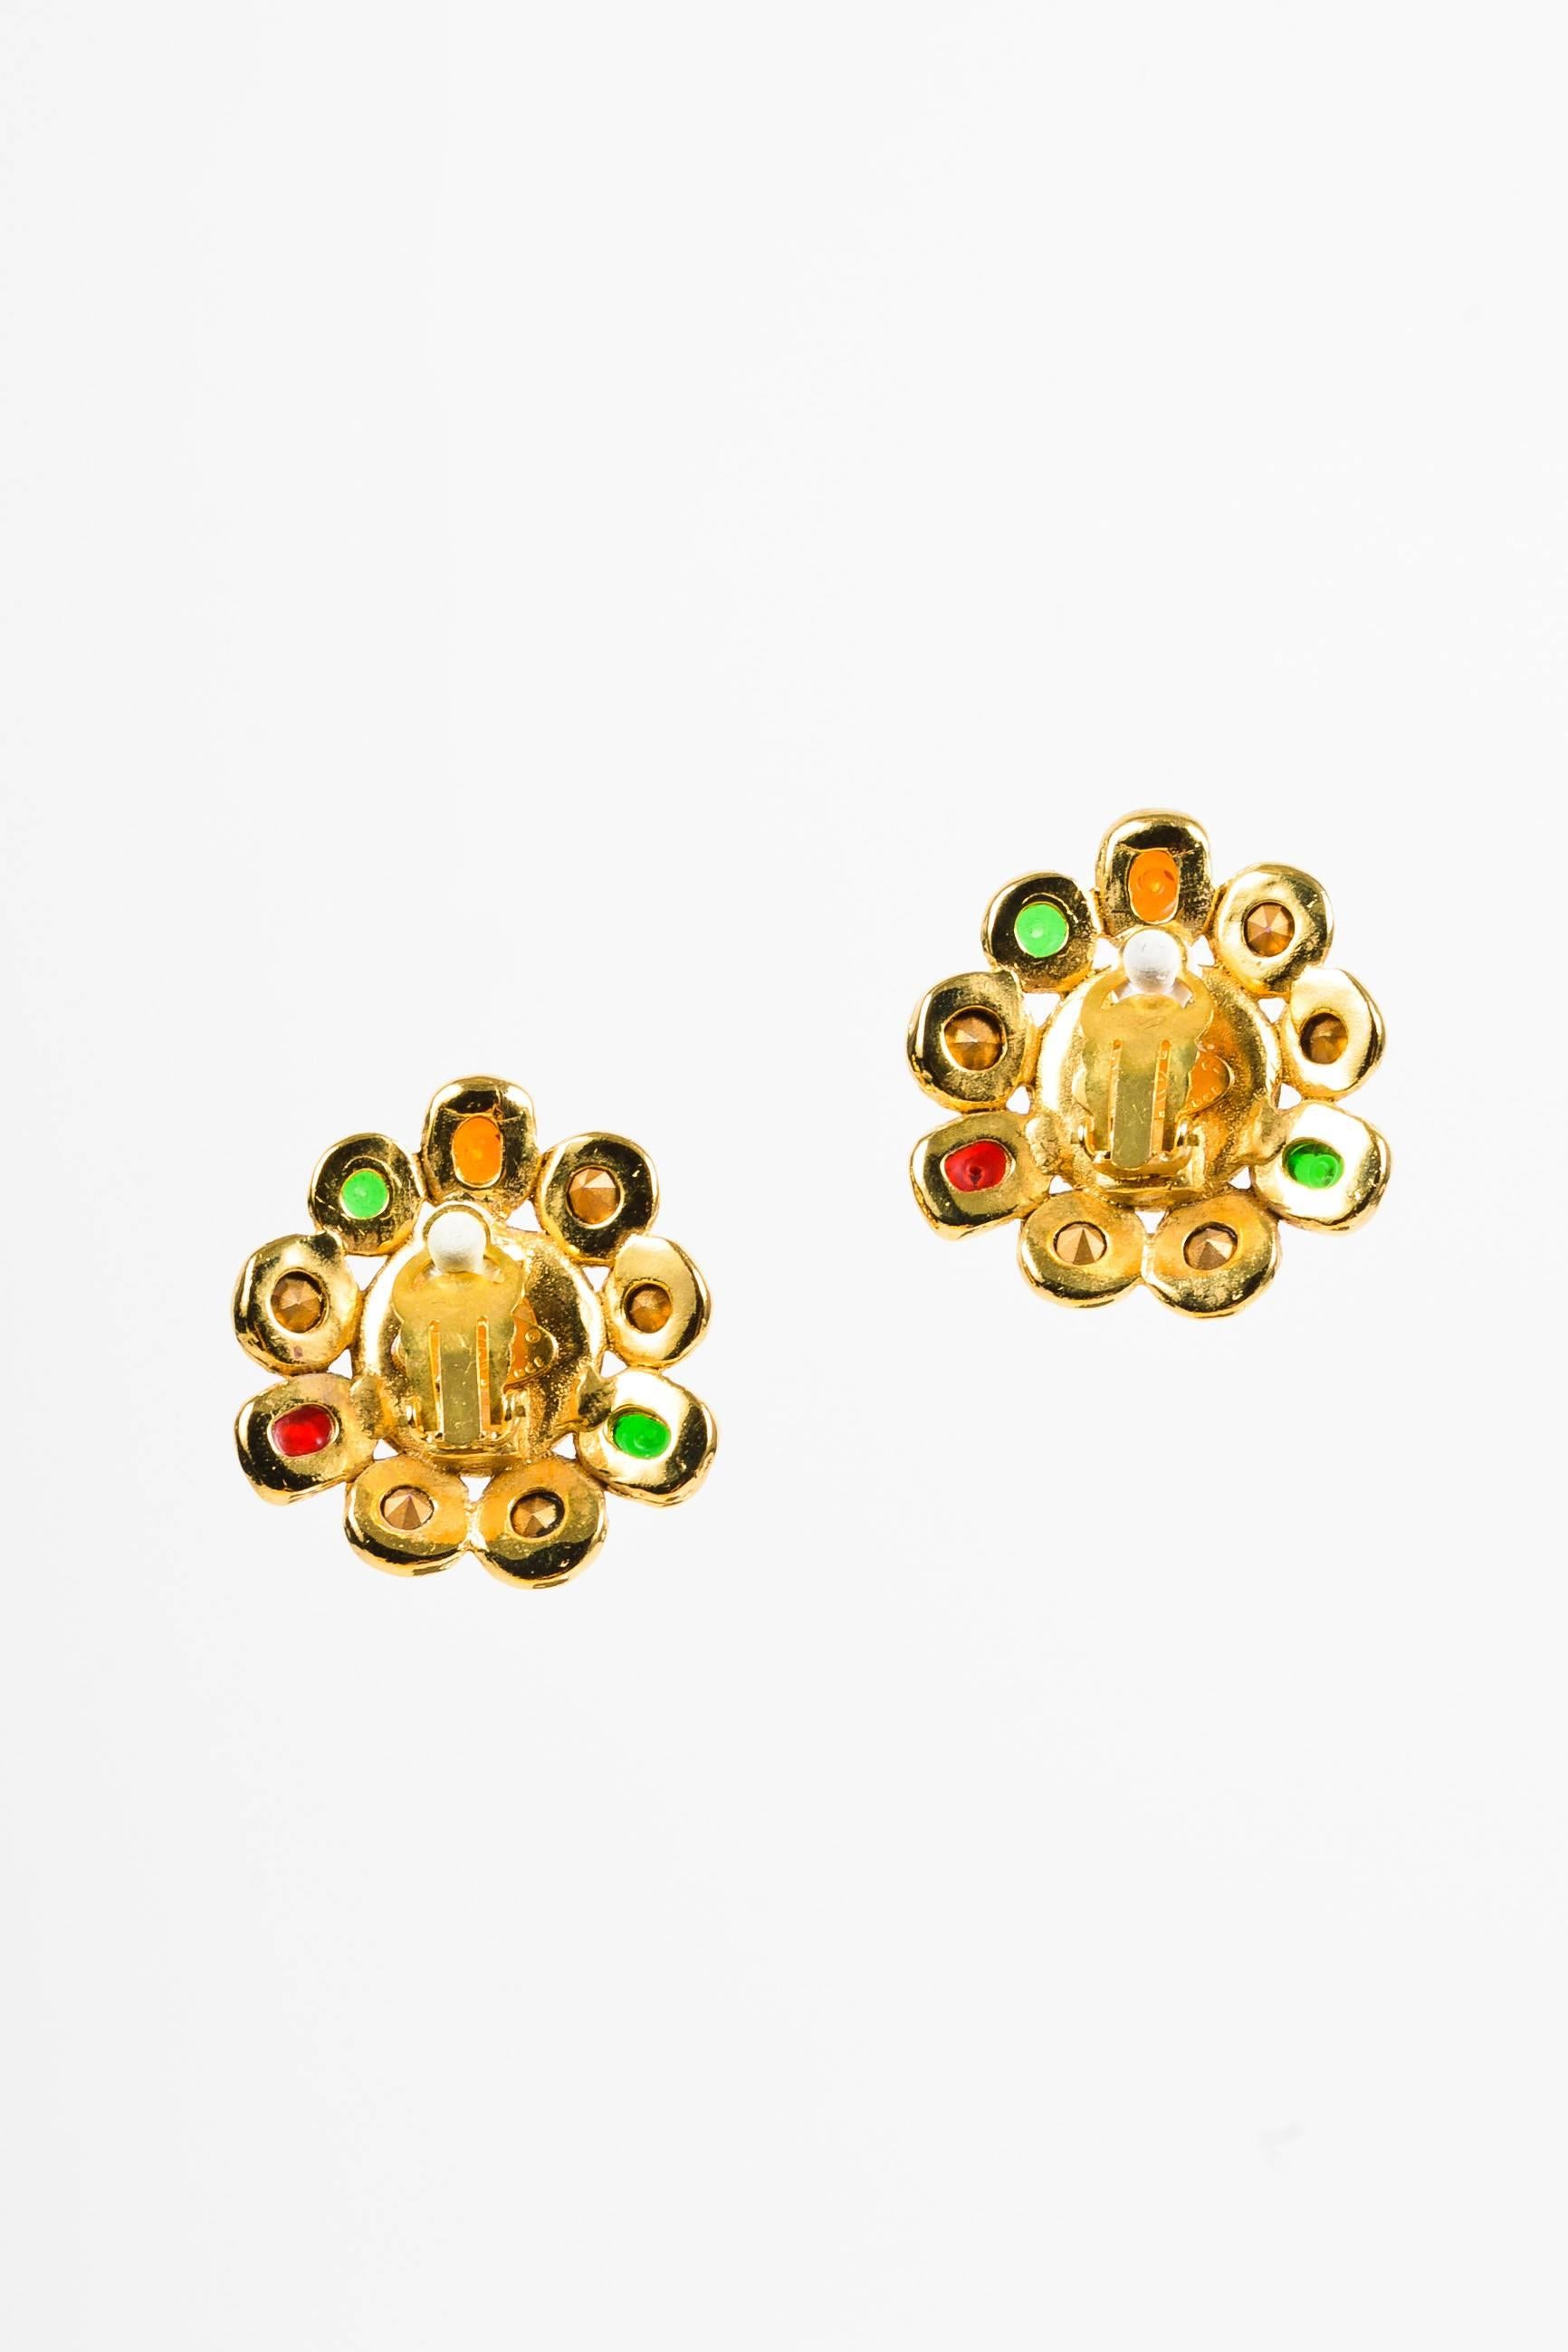 Comes with box. Beautiful Chanel statement costume earrings from season 26, circa 1989. Multicolor gripoix stones and shimmering rhinestones encircle a faux pearl centerpiece. Gold-tone metal. Hinge clip on closure with pad.

Additional